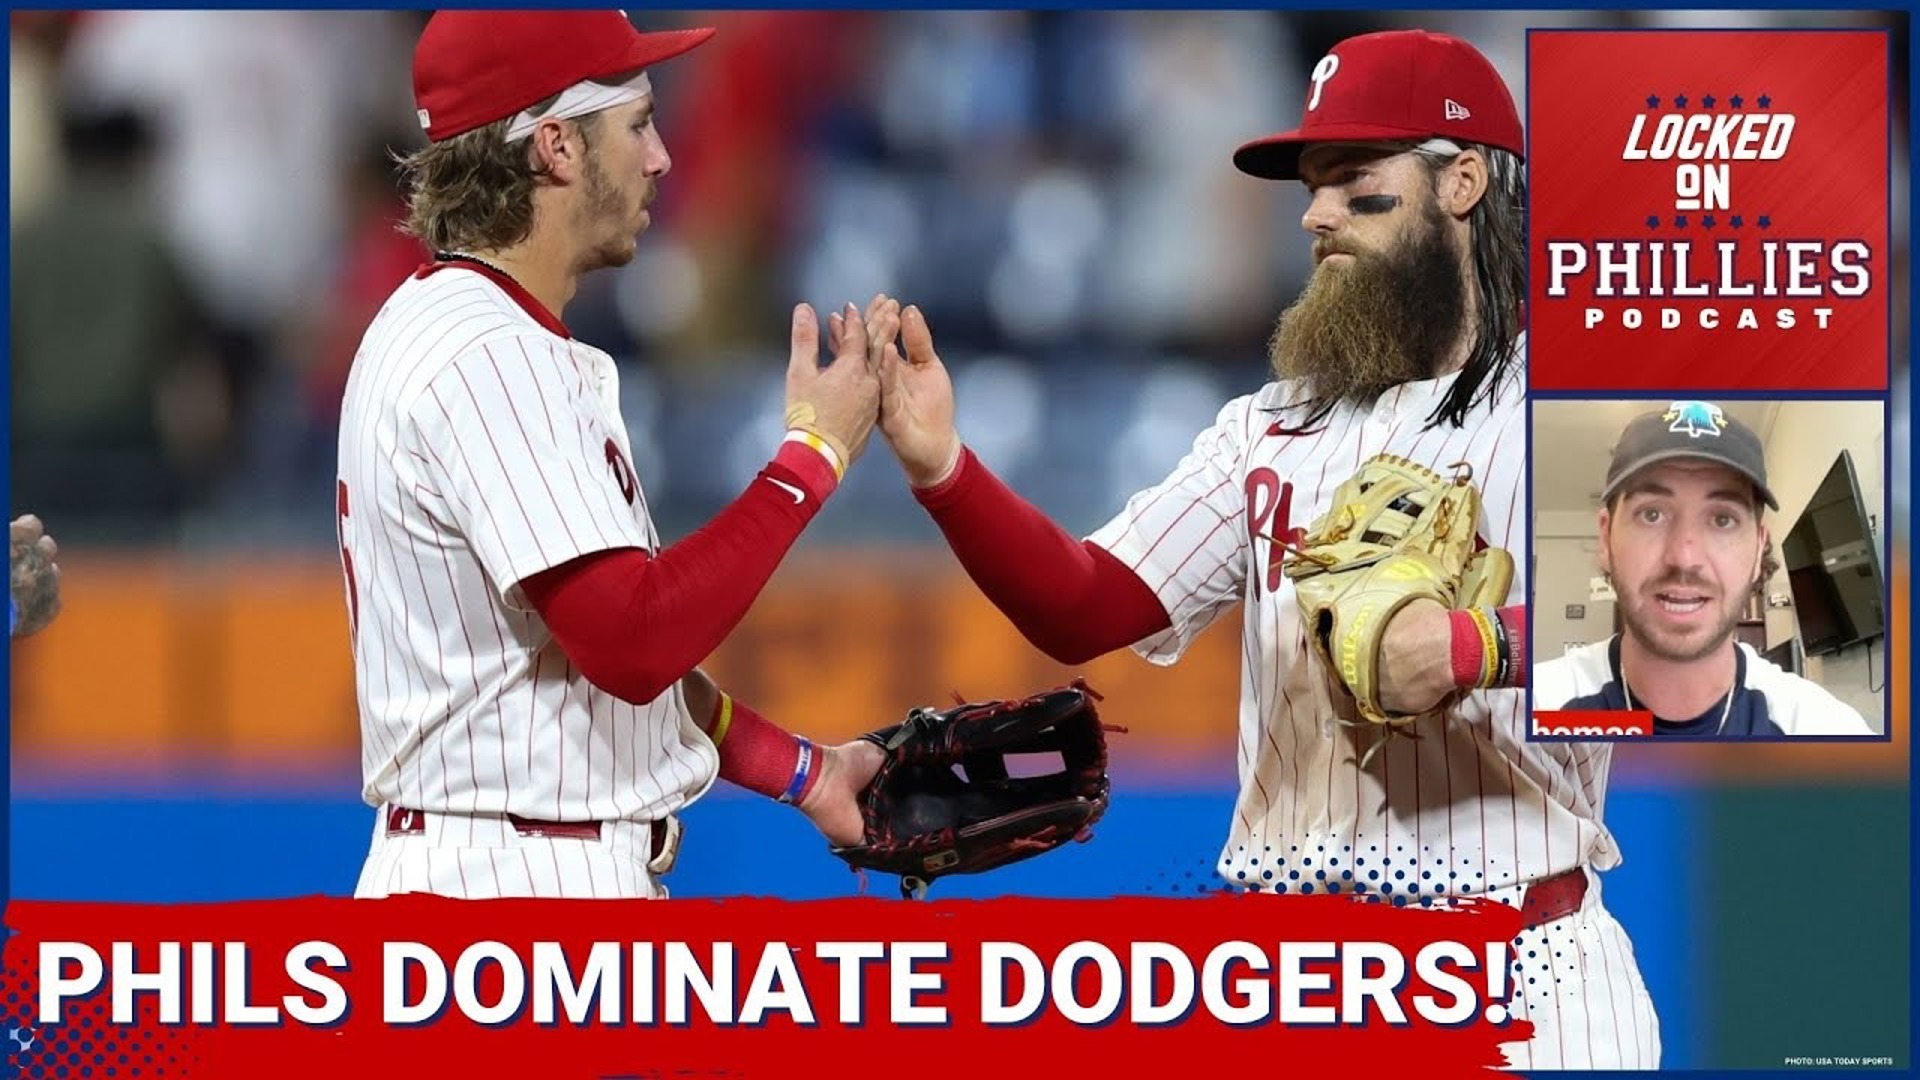 In today's episode, Connor celebrates an absolute dismantling of the Los Angeles Dodgers that the Philadelphia Phillies put together last night.